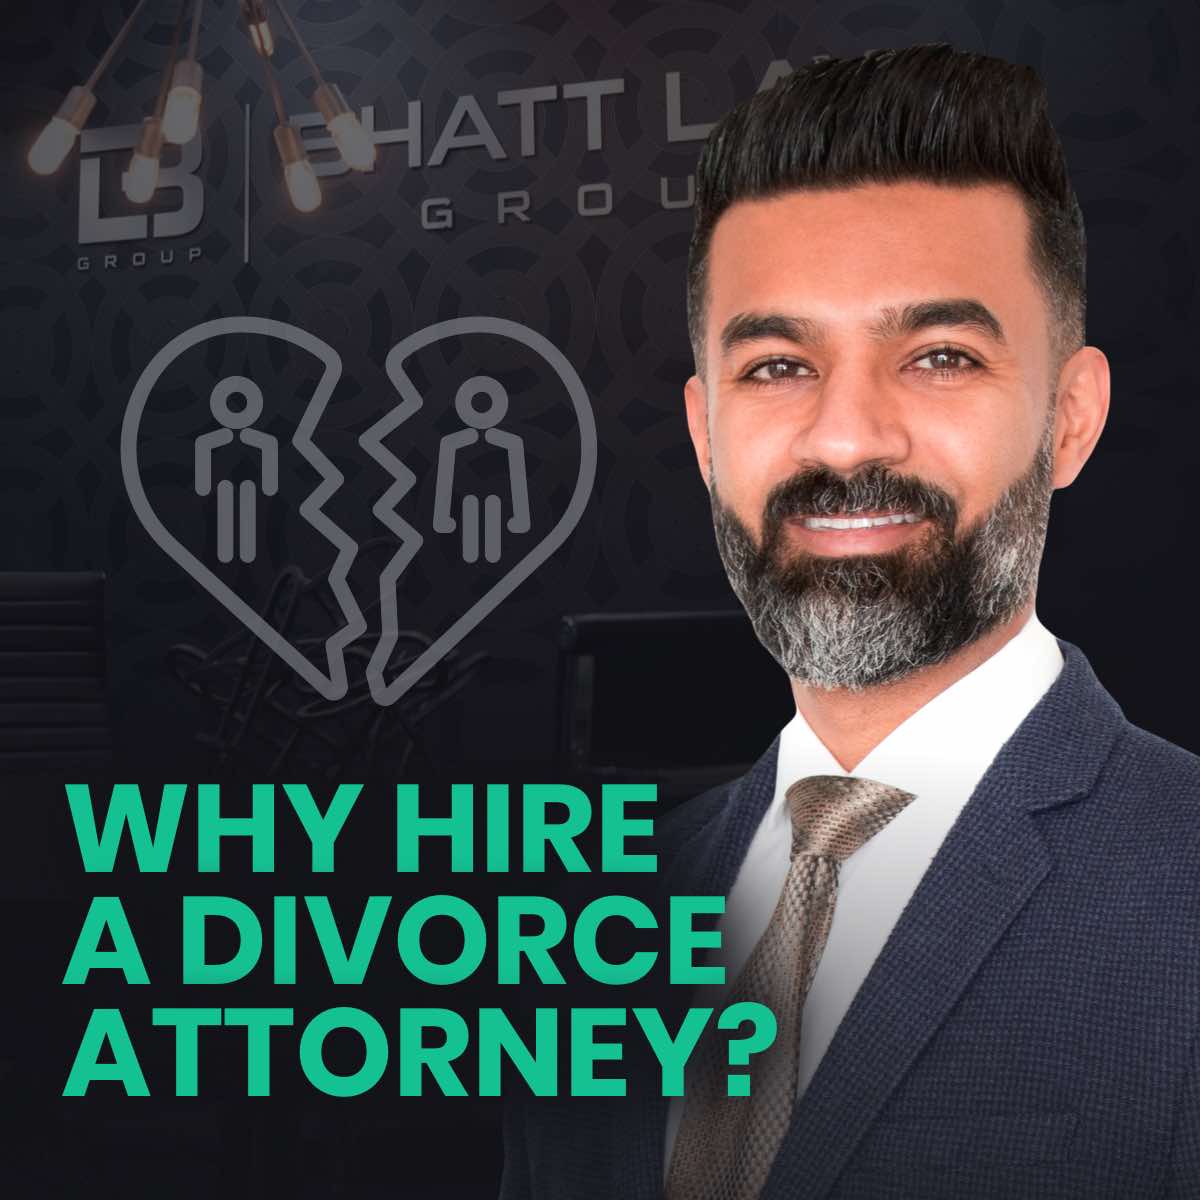 Jersey City Divorce Attorney Why Hire a Divorce Attorney